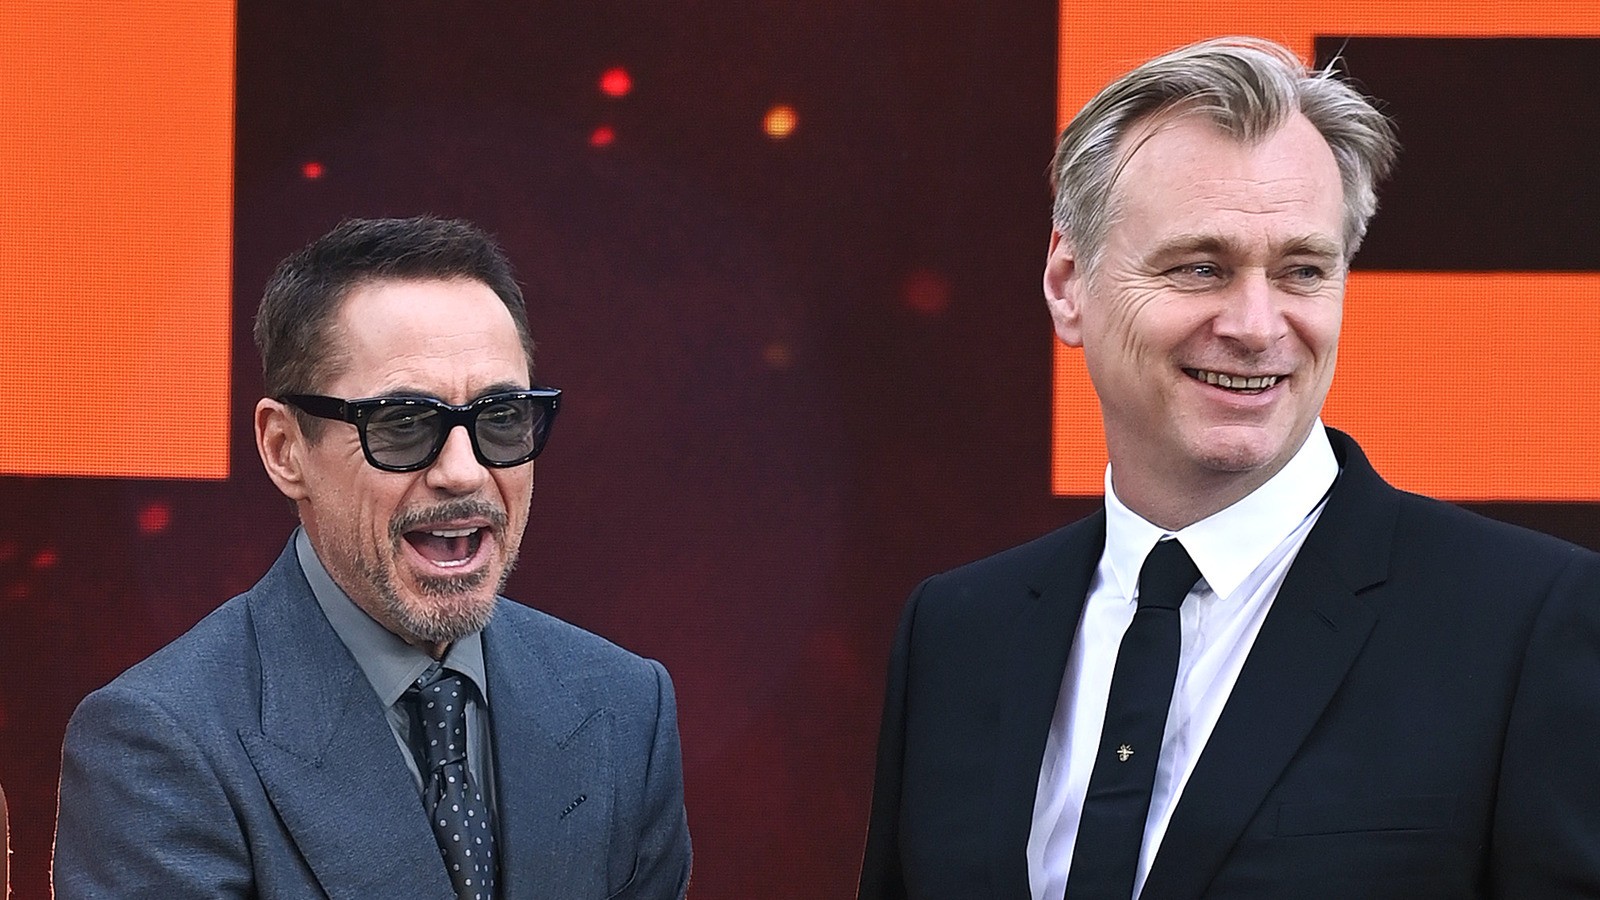 Robert Downey Jr. and Christopher Nolan at the UK premiere of Oppenheimer